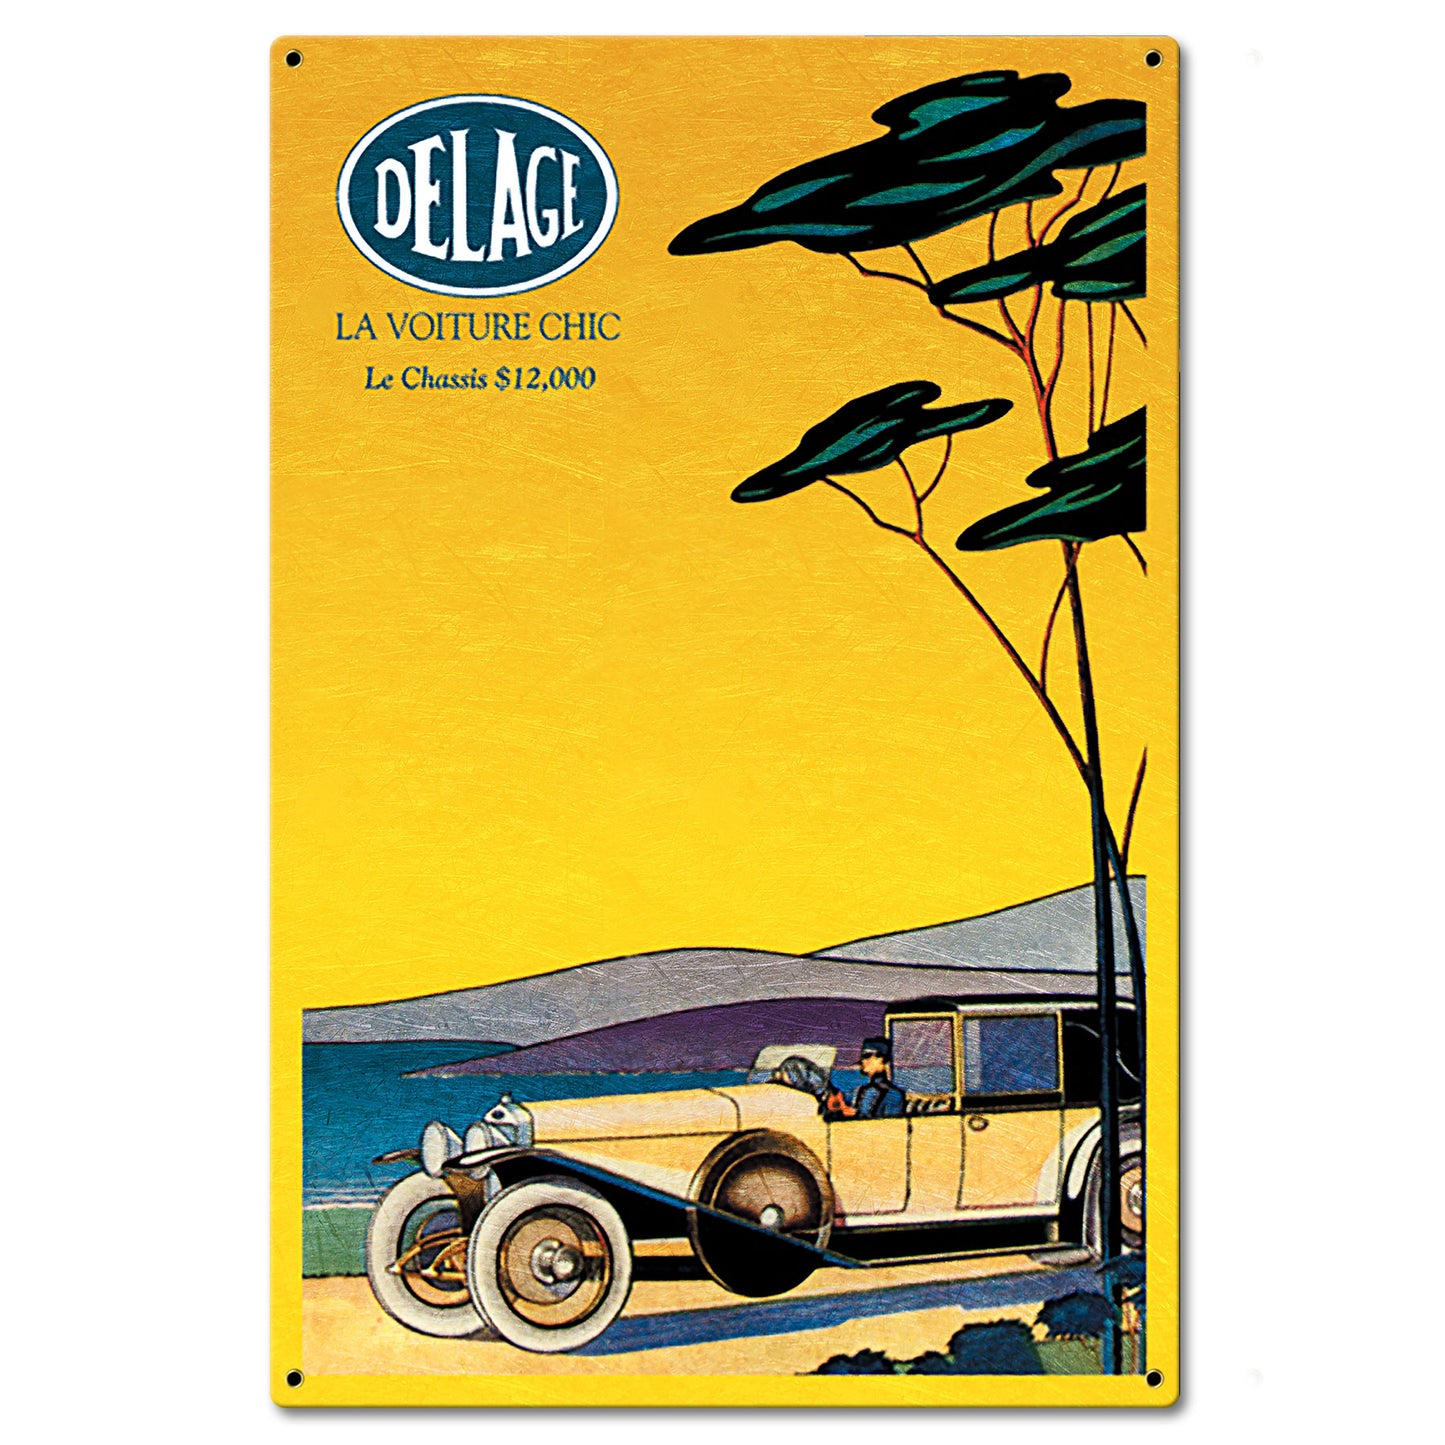 1930's Delage Ad Metal Sign 16in X 24in 